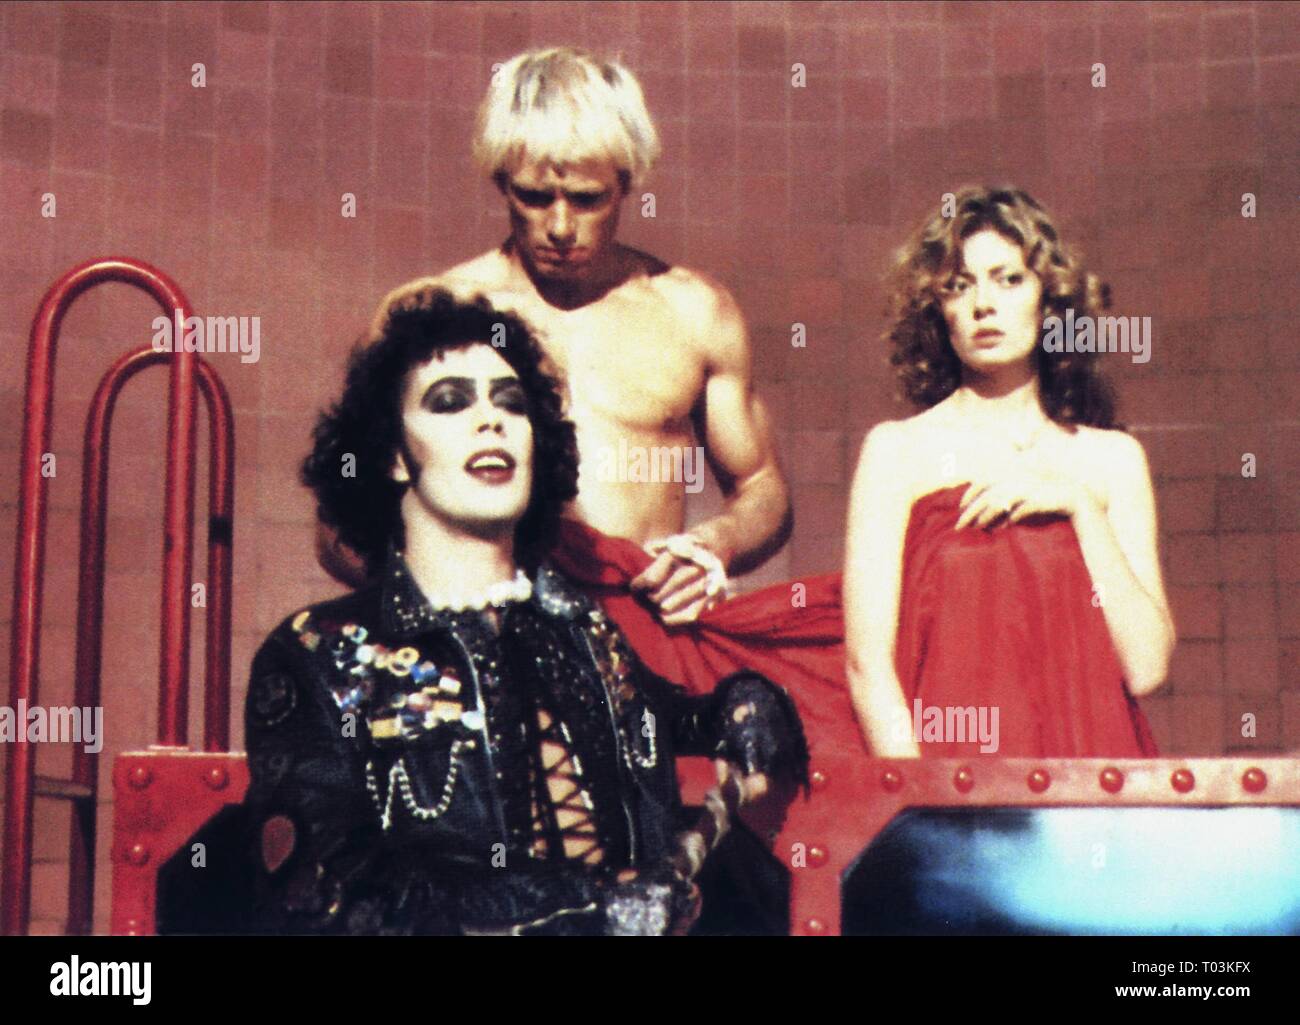 TIM CURRY, PETER HINWOOD, SUSAN SARANDON, THE ROCKY HORROR PICTURE SHOW, 1975 Stock Photo